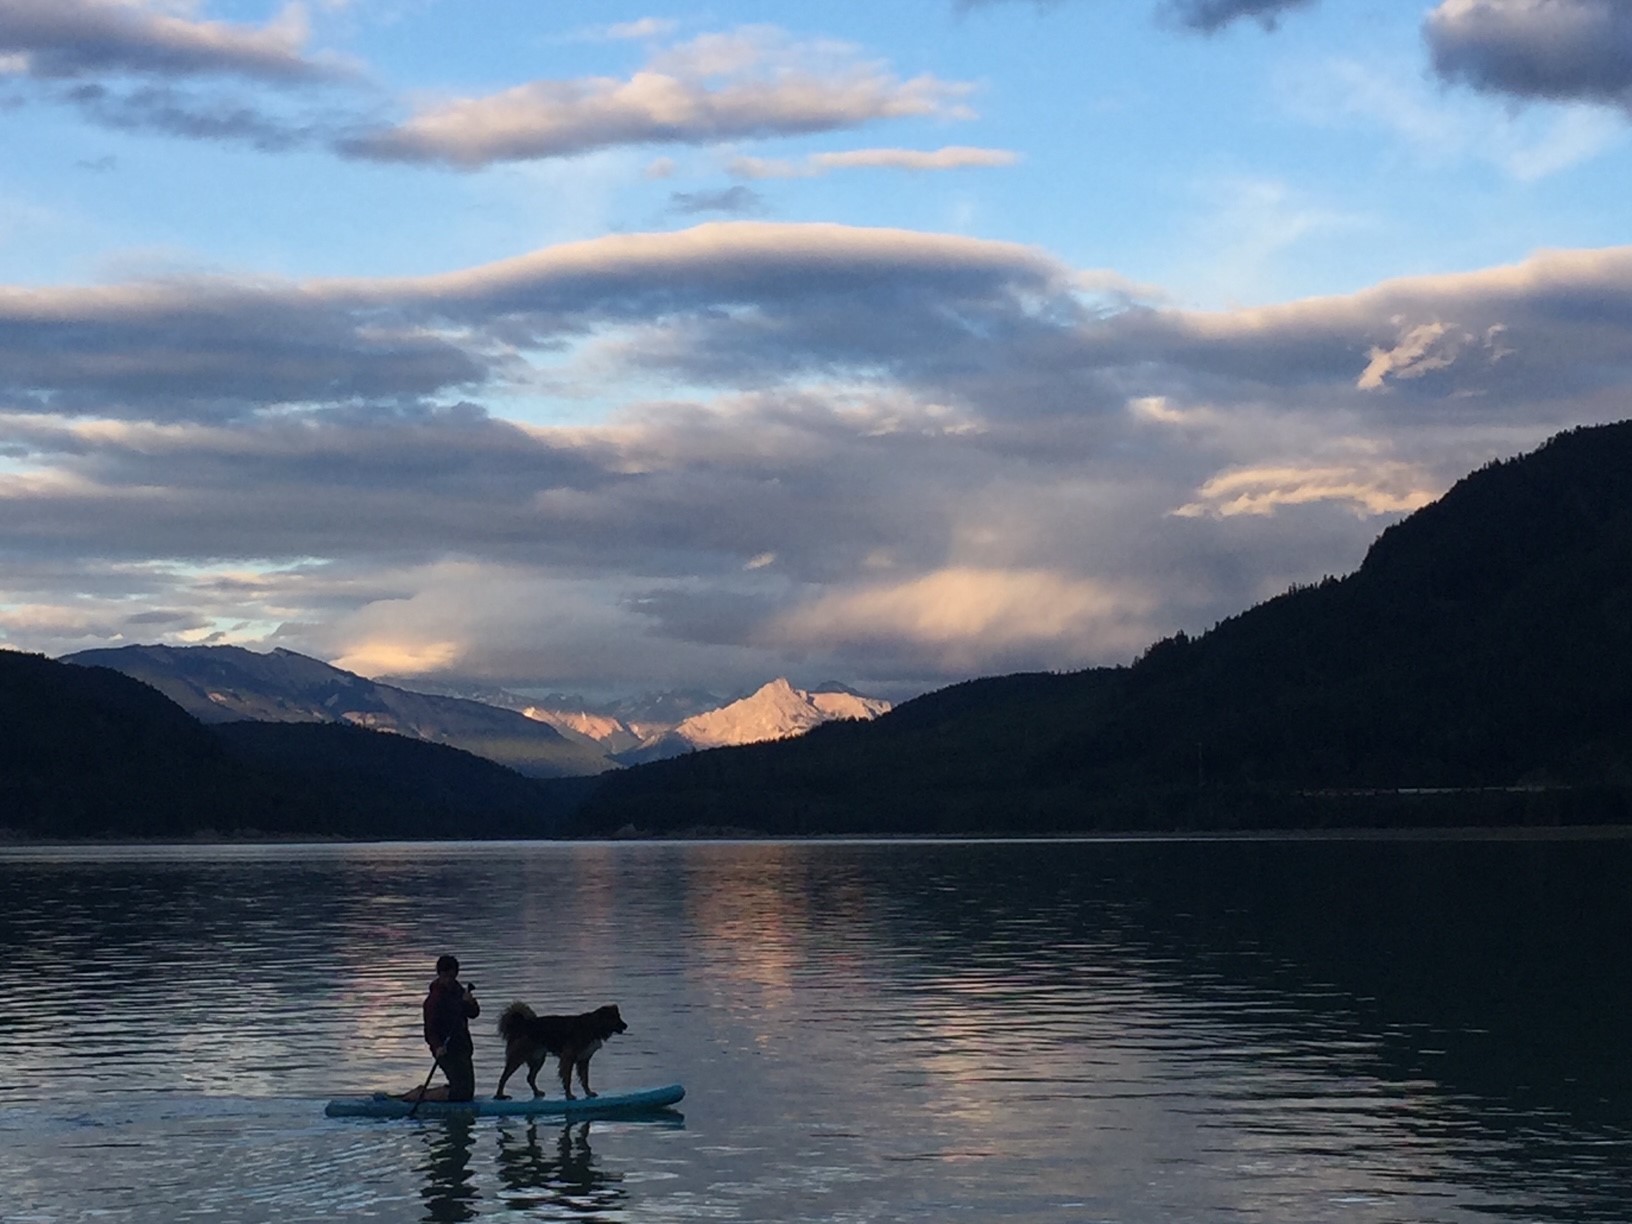 A lake with snow-capped mountains in the background at sunset. On the lake is the silhouette of a person and a dog on a paddleboard. 